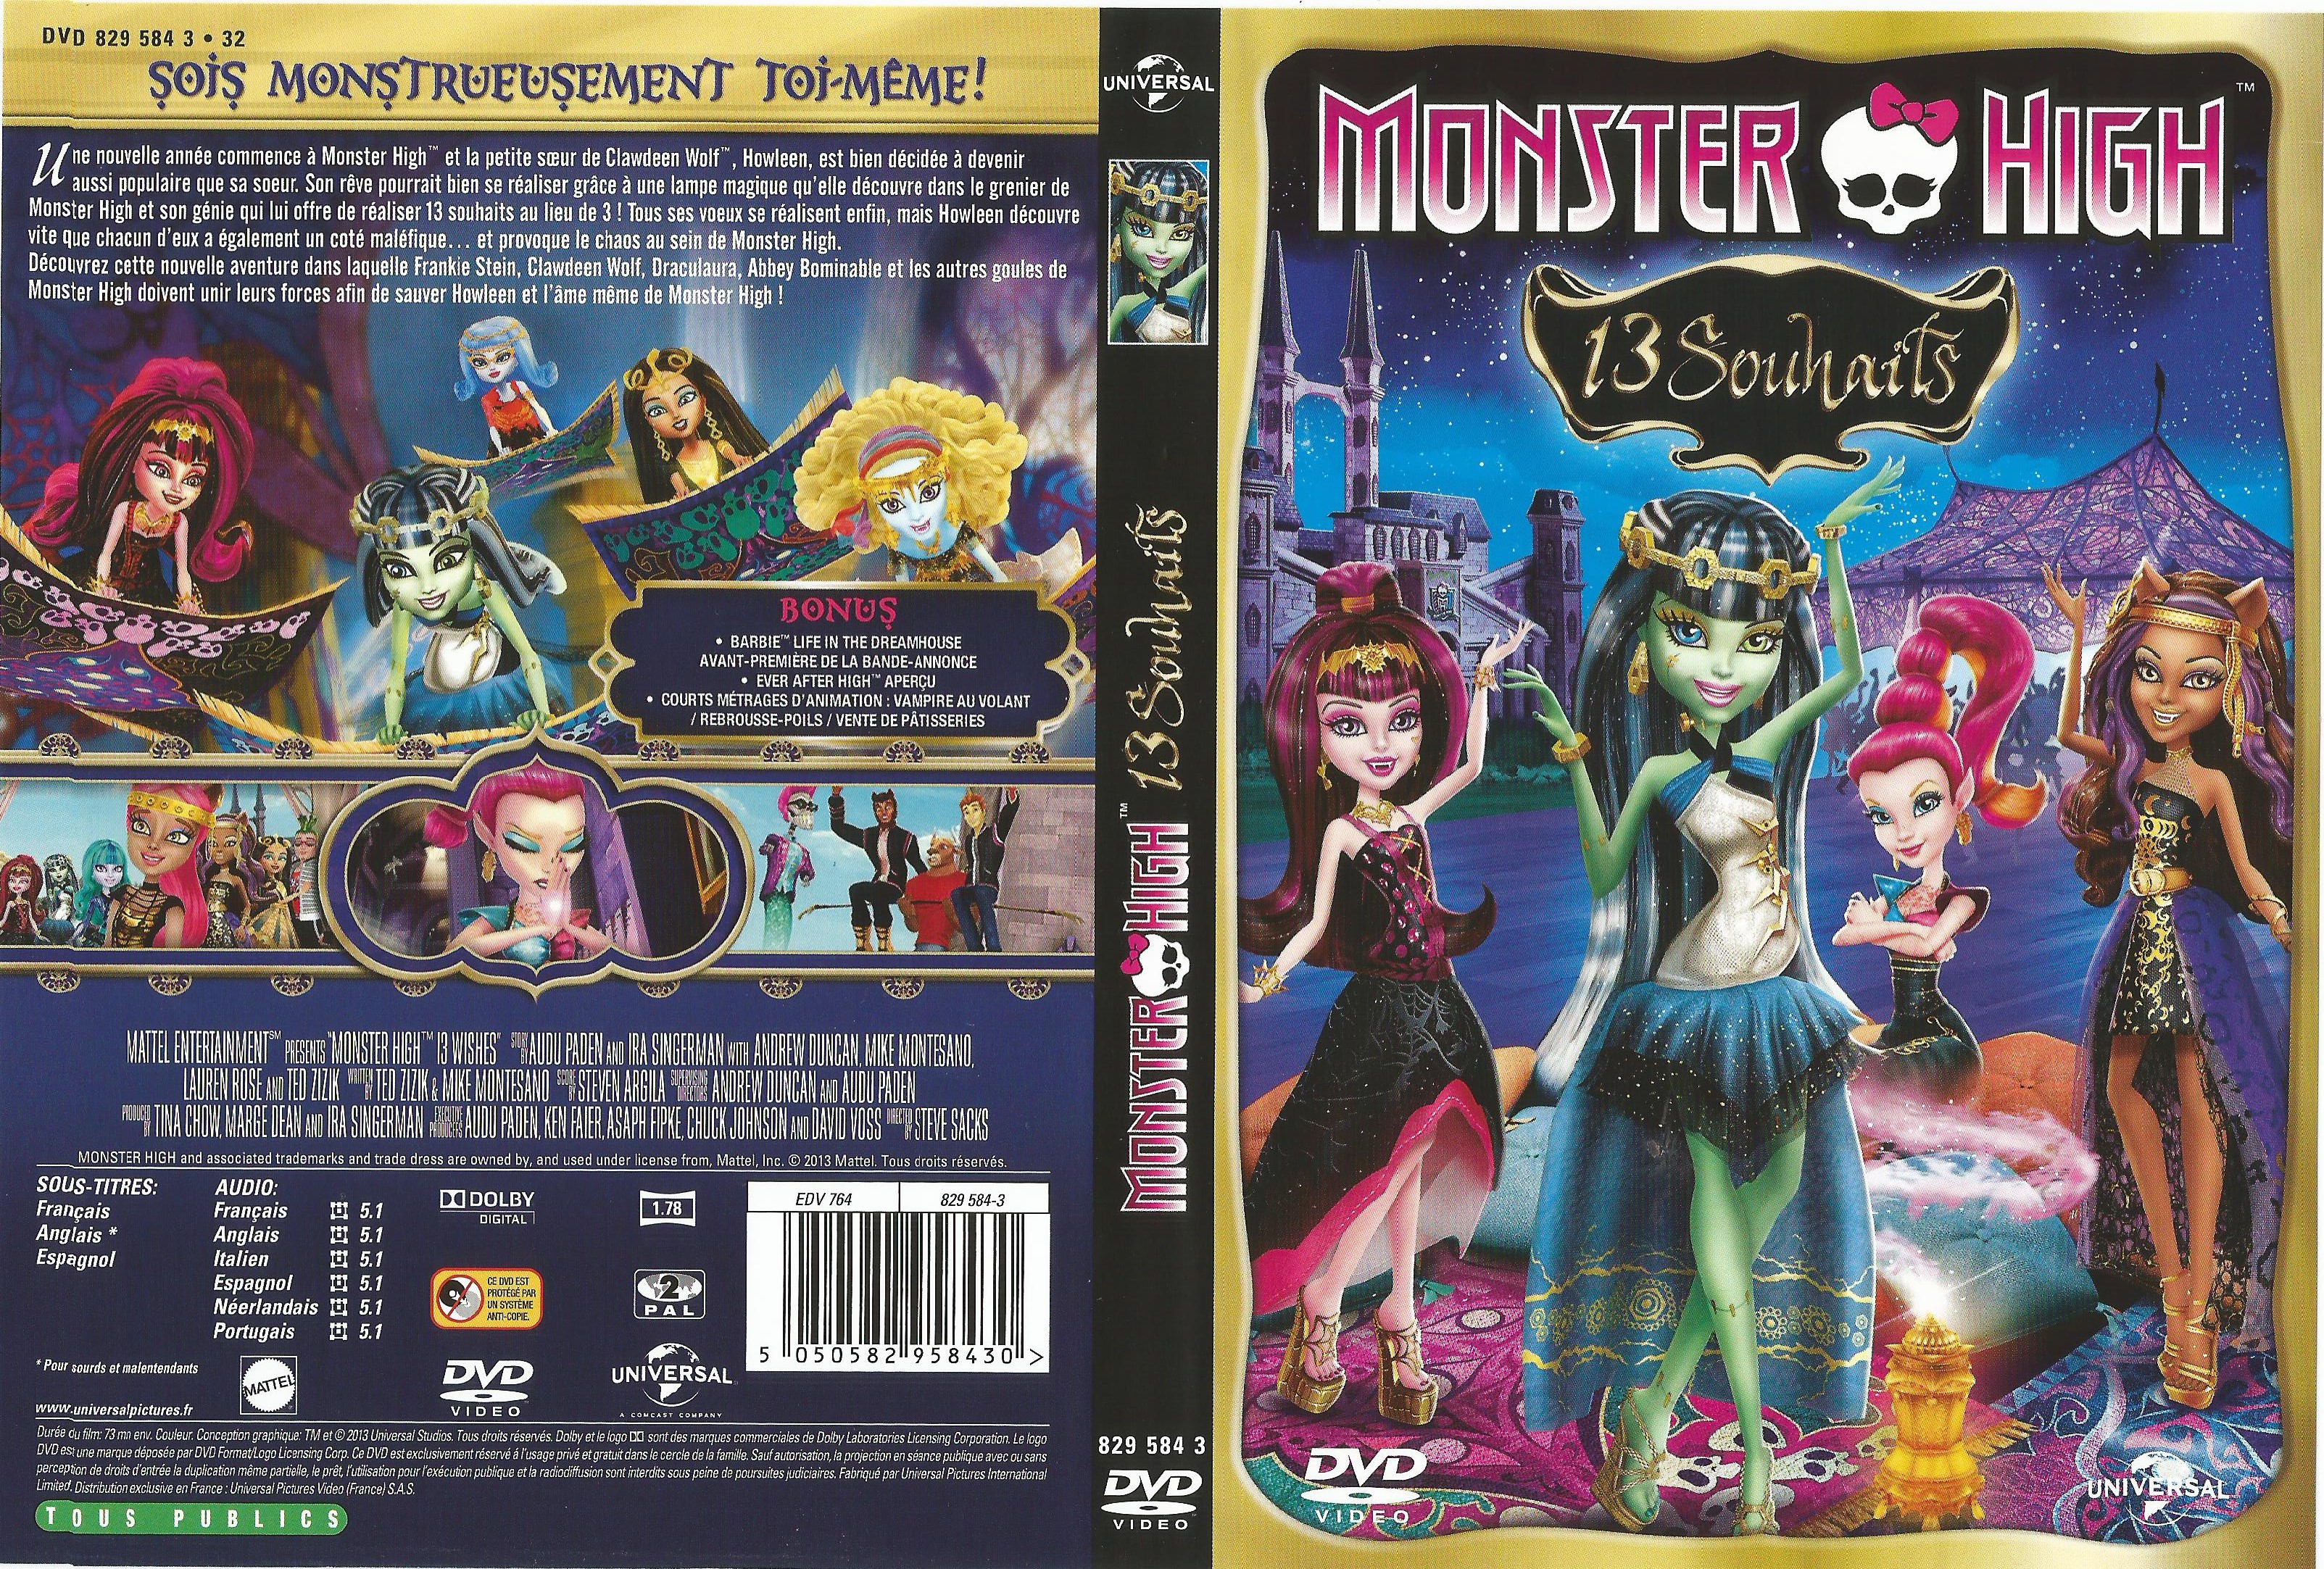 Jaquette DVD Monster High 13 souhaits